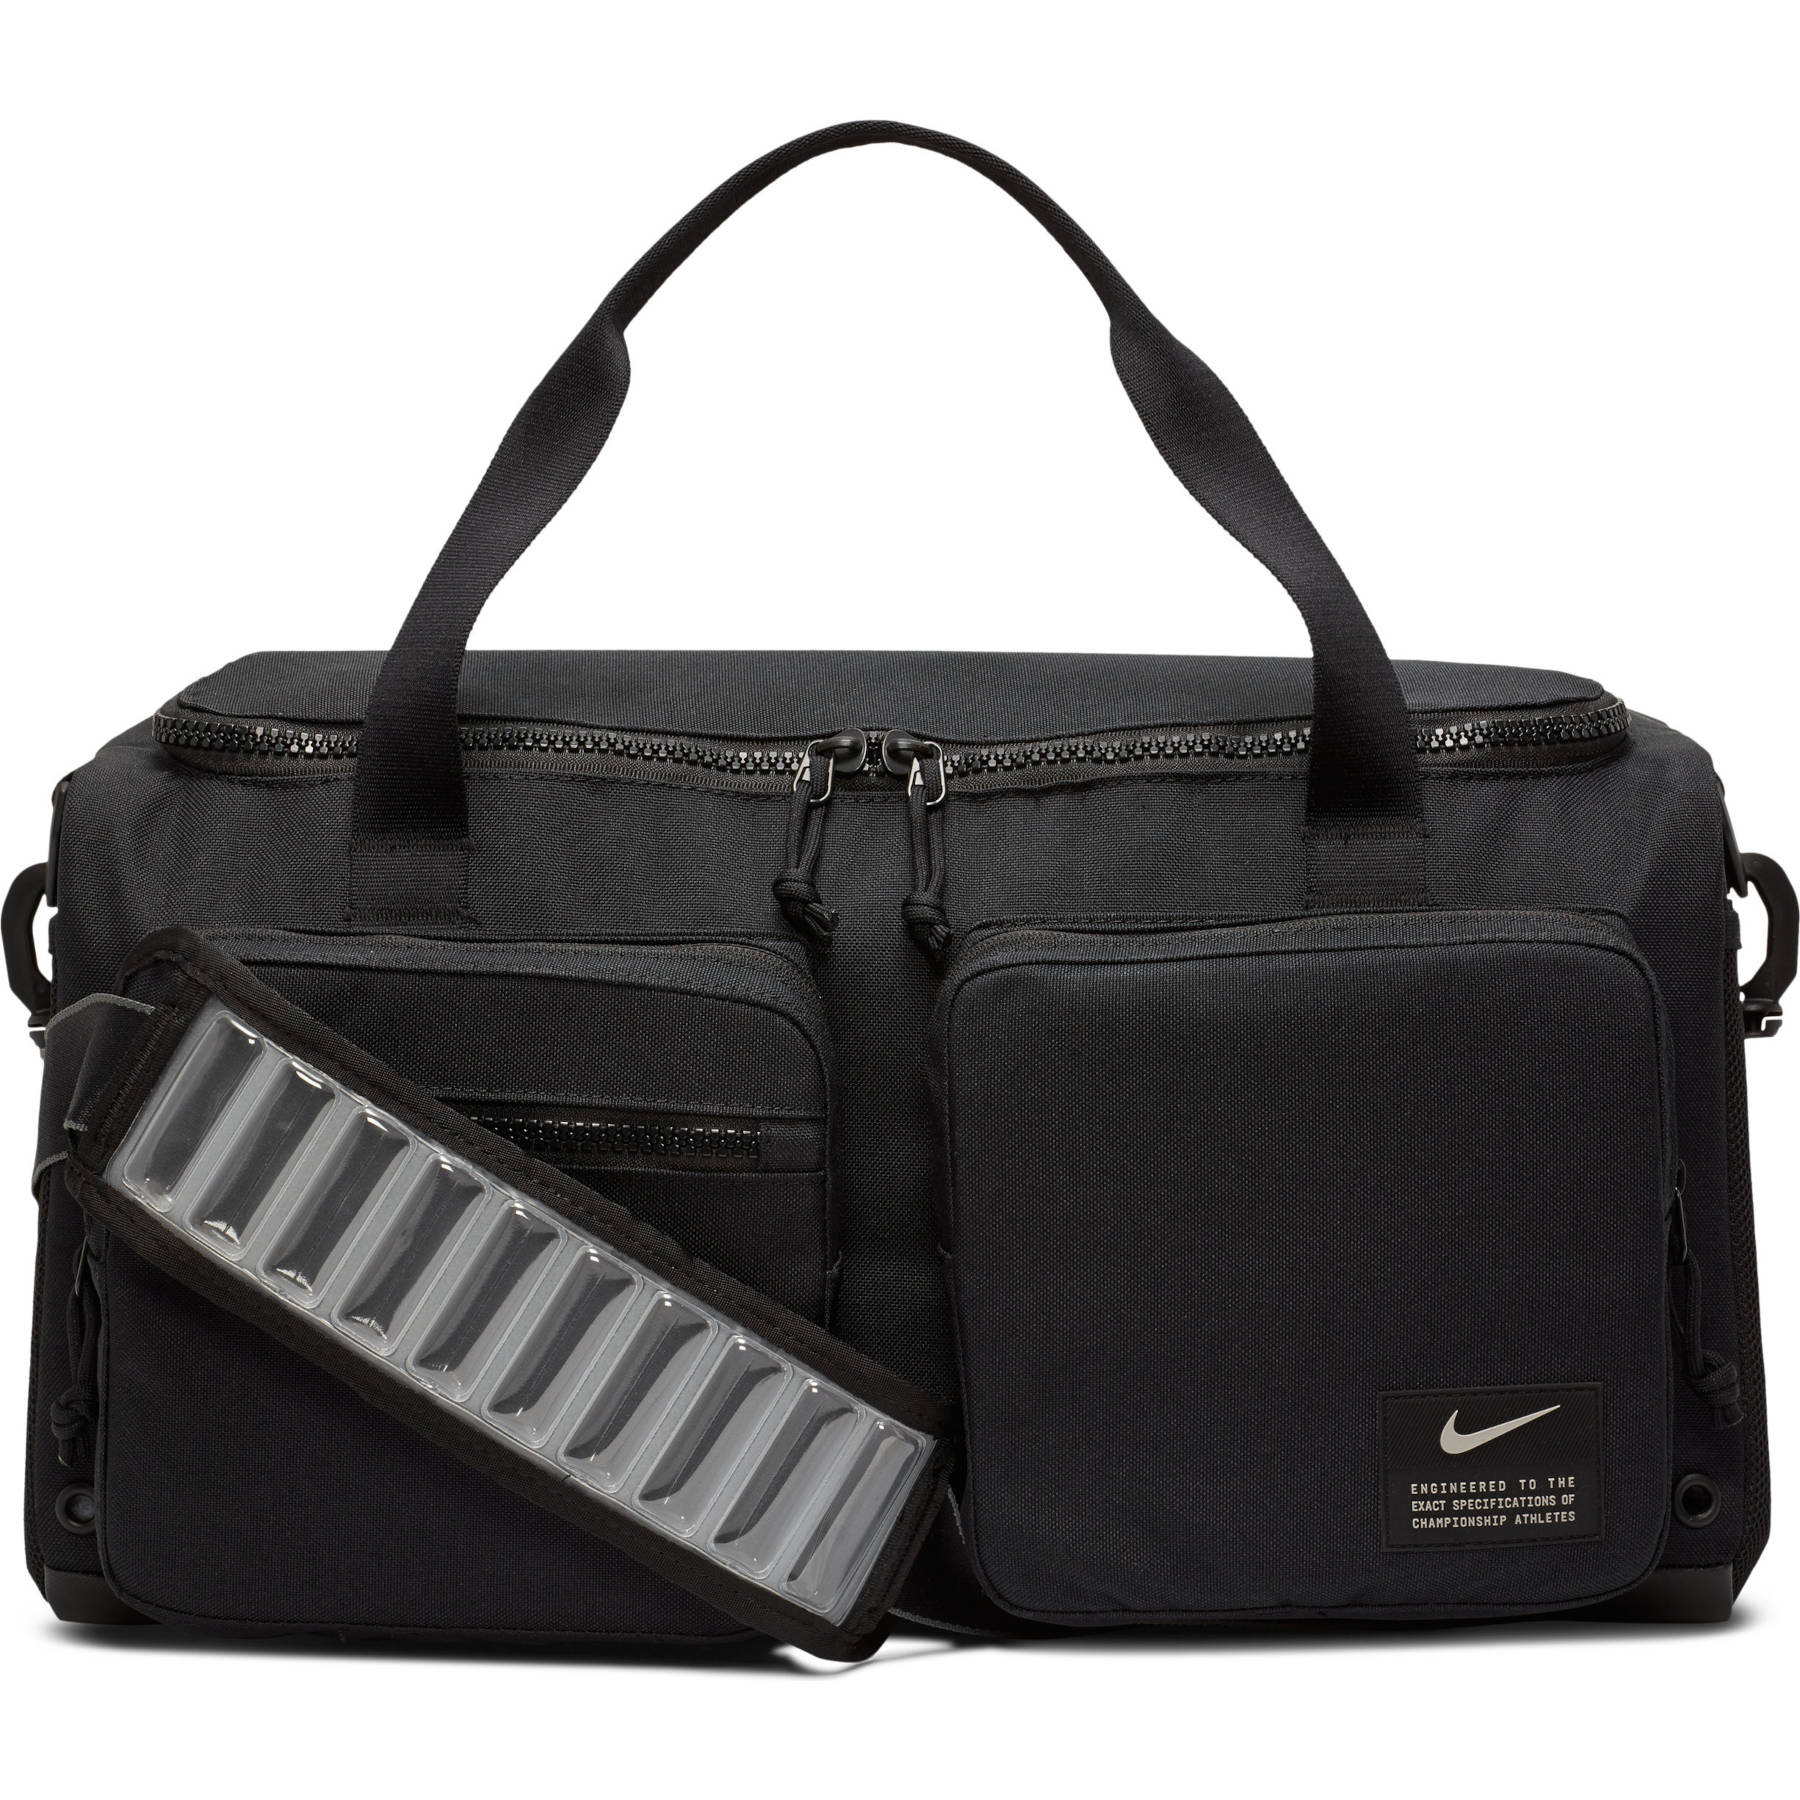 Picture of Nike Utility Power Training Duffel Bag (Small) - black/black/enigma stone CK2795-010